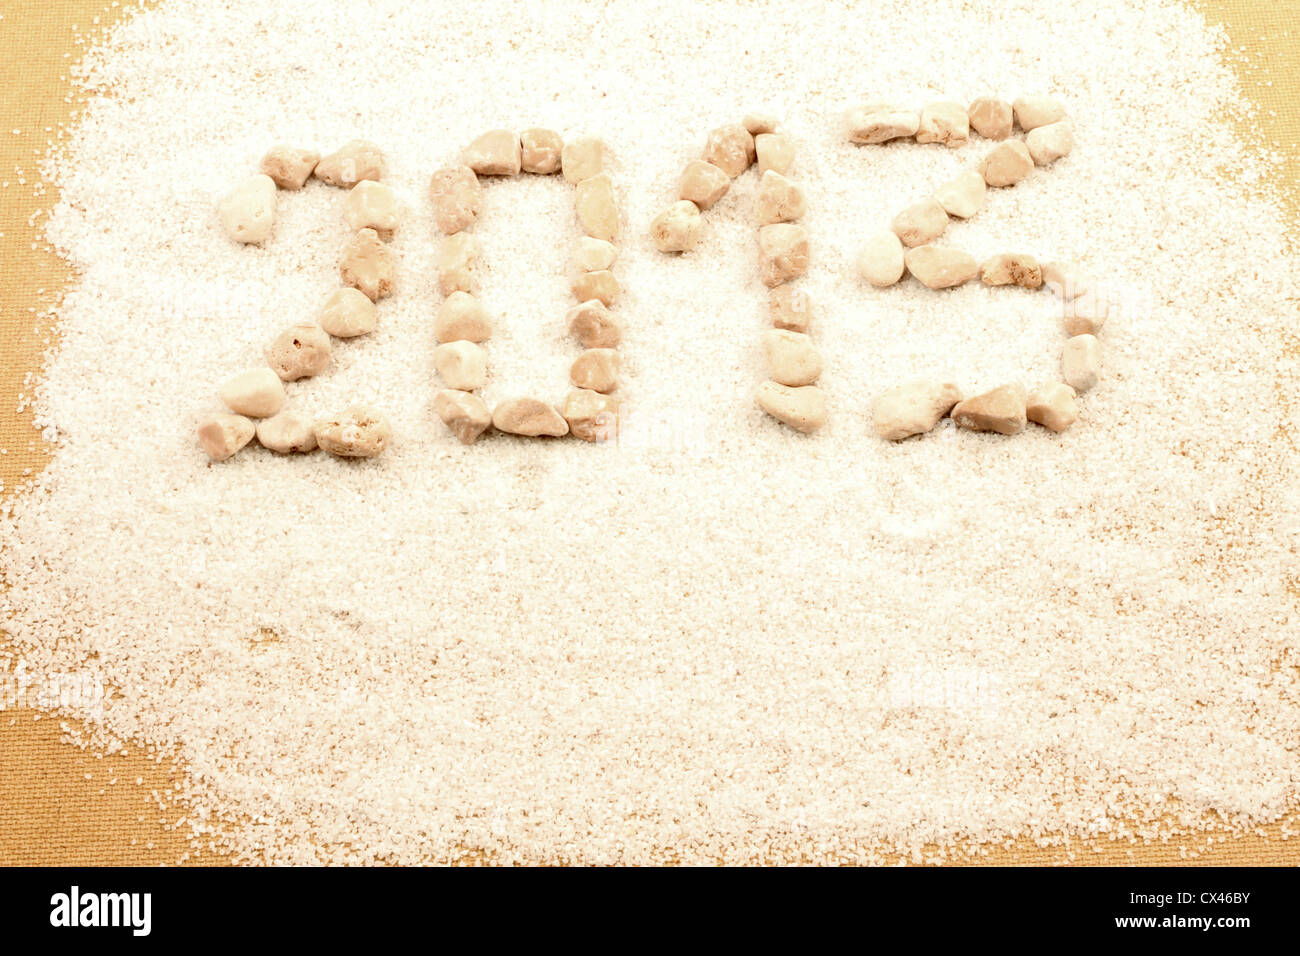 New year 2013 written with pebbles. Stock Photo